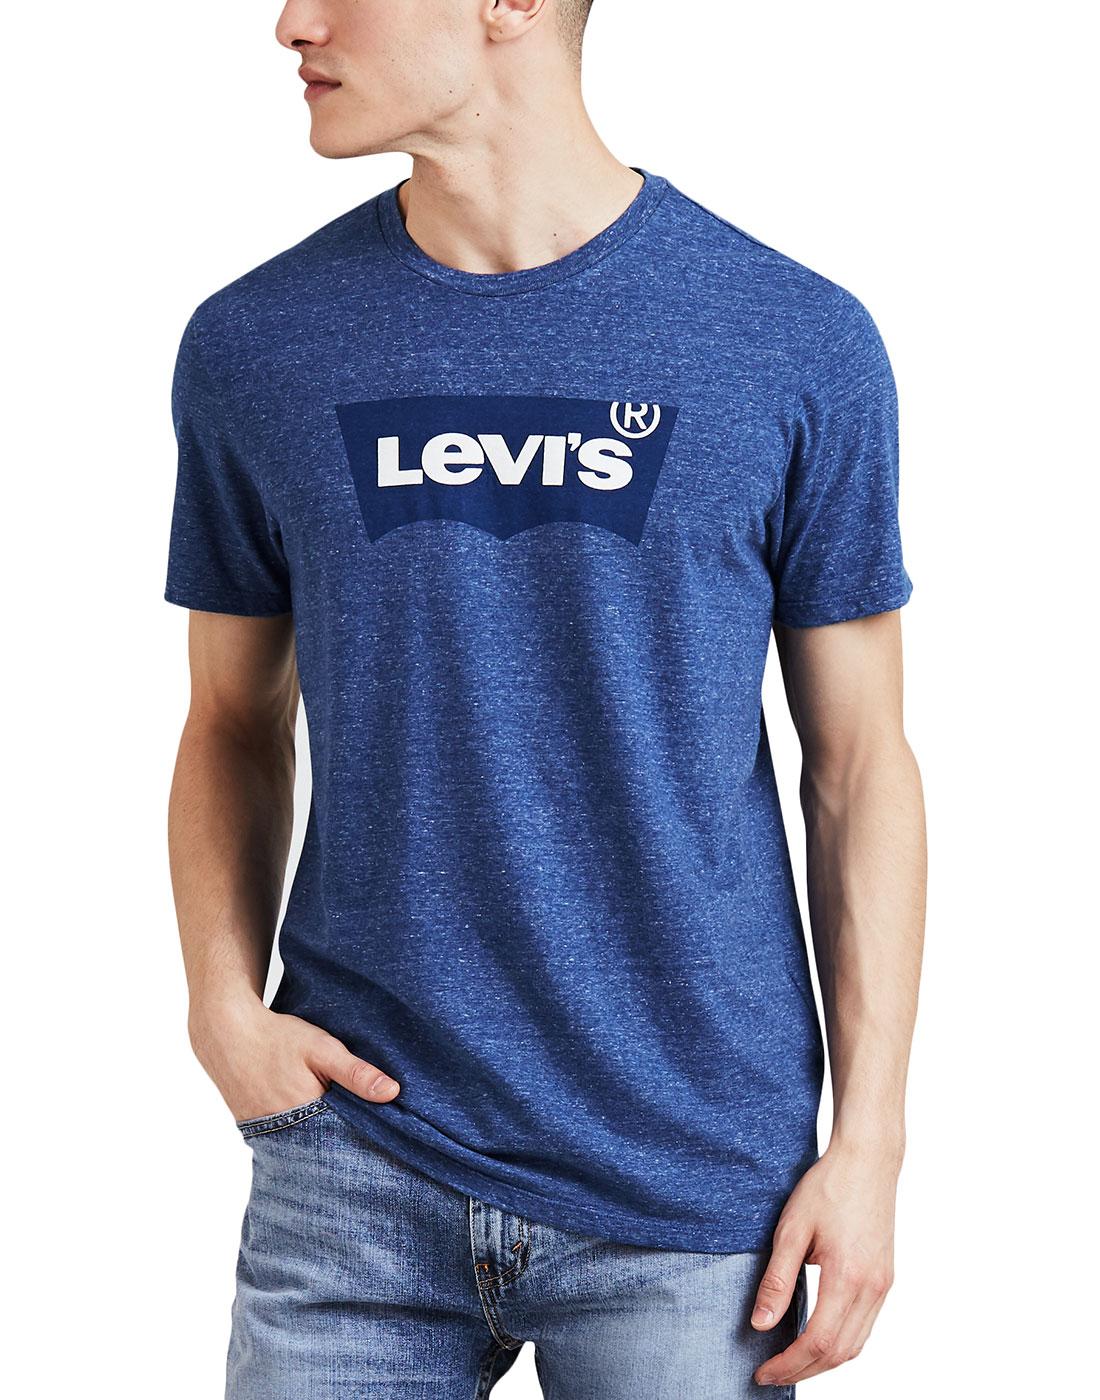 LEVI'S Batwing Flock Retro Housemark Graphic Tee in Blue